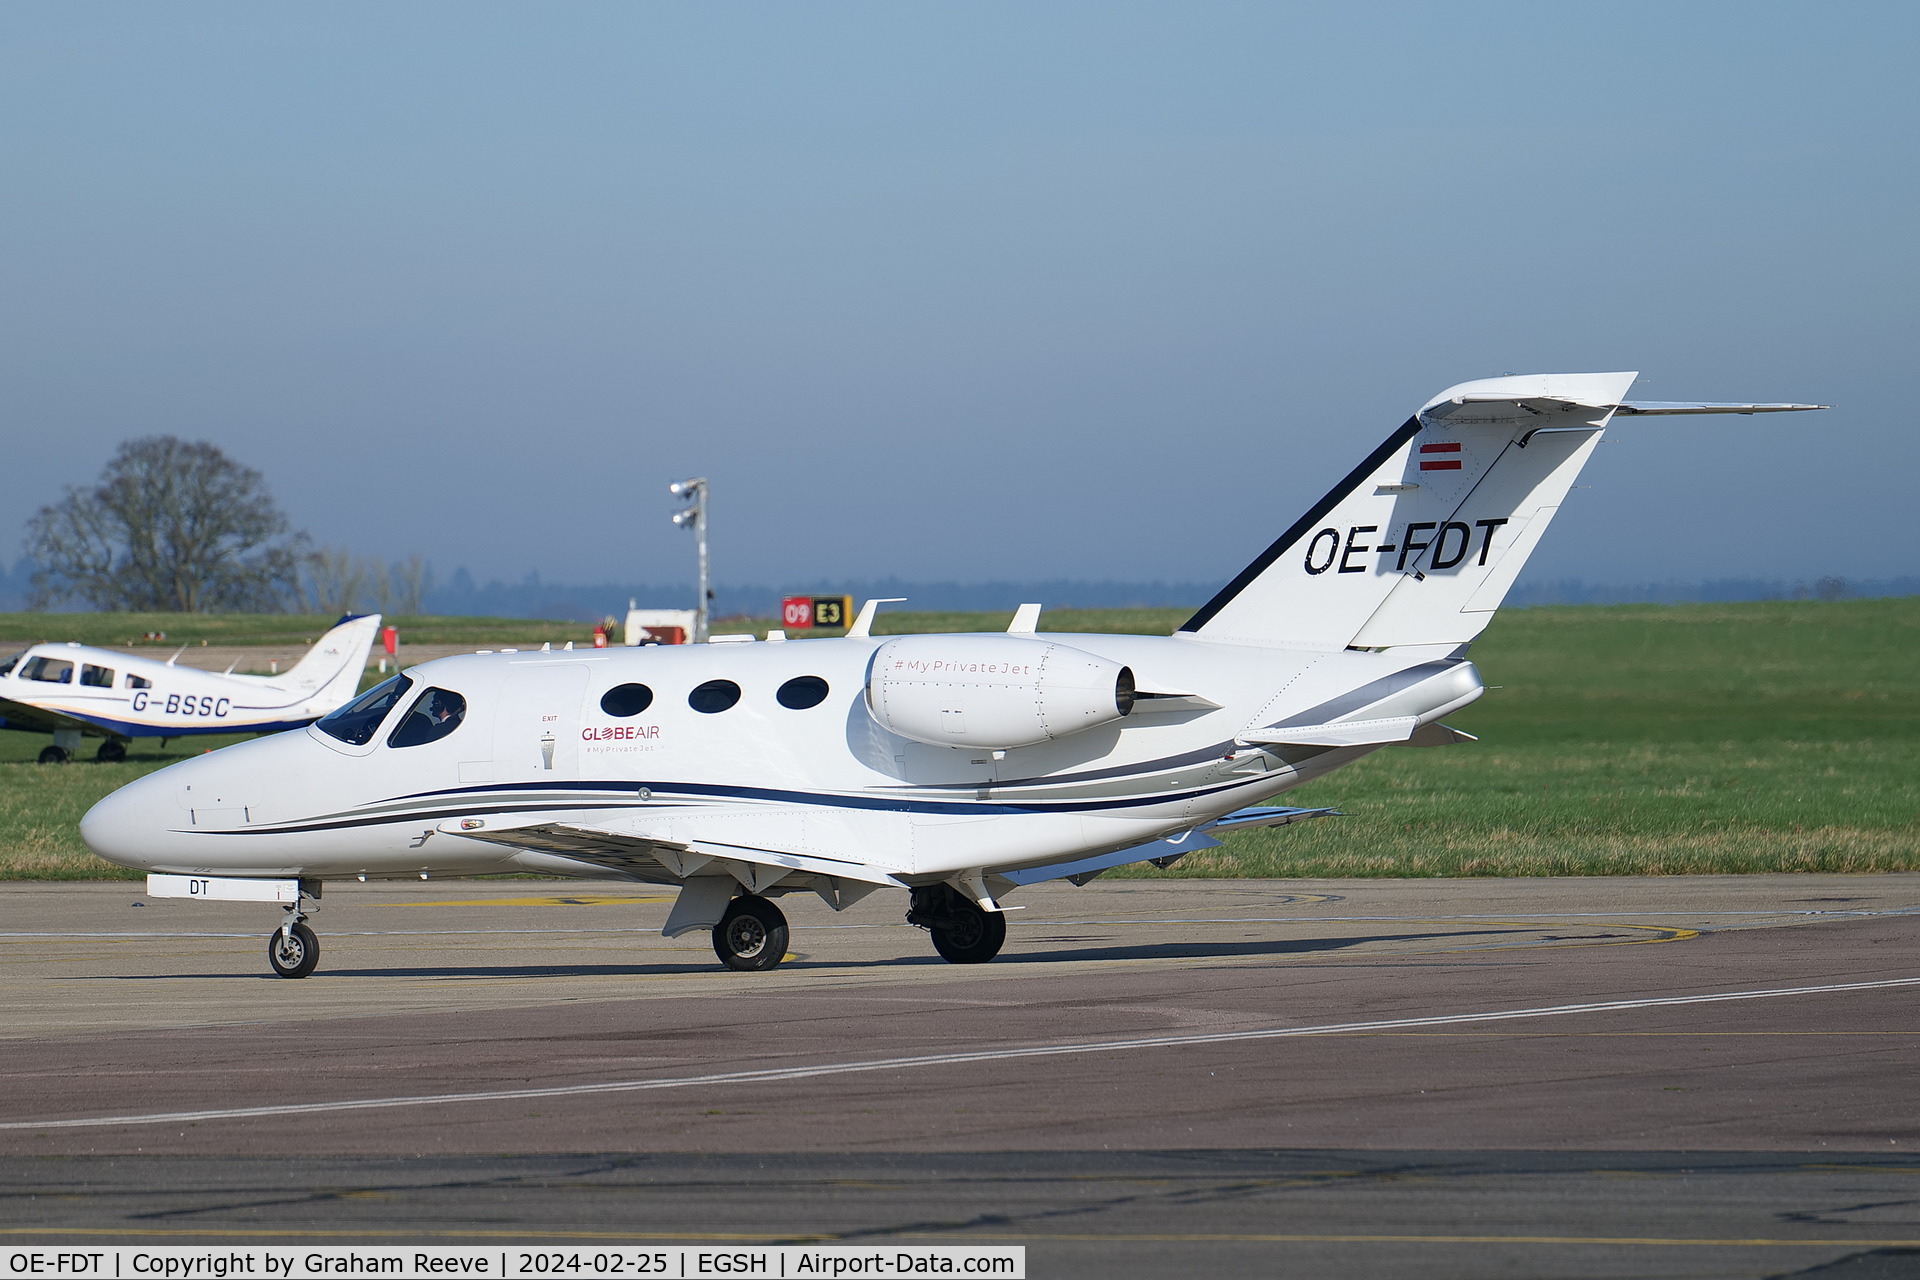 OE-FDT, 2009 Cessna 510 Citation Mustang Citation Mustang C/N 510-0156, Just landed at Norwich.